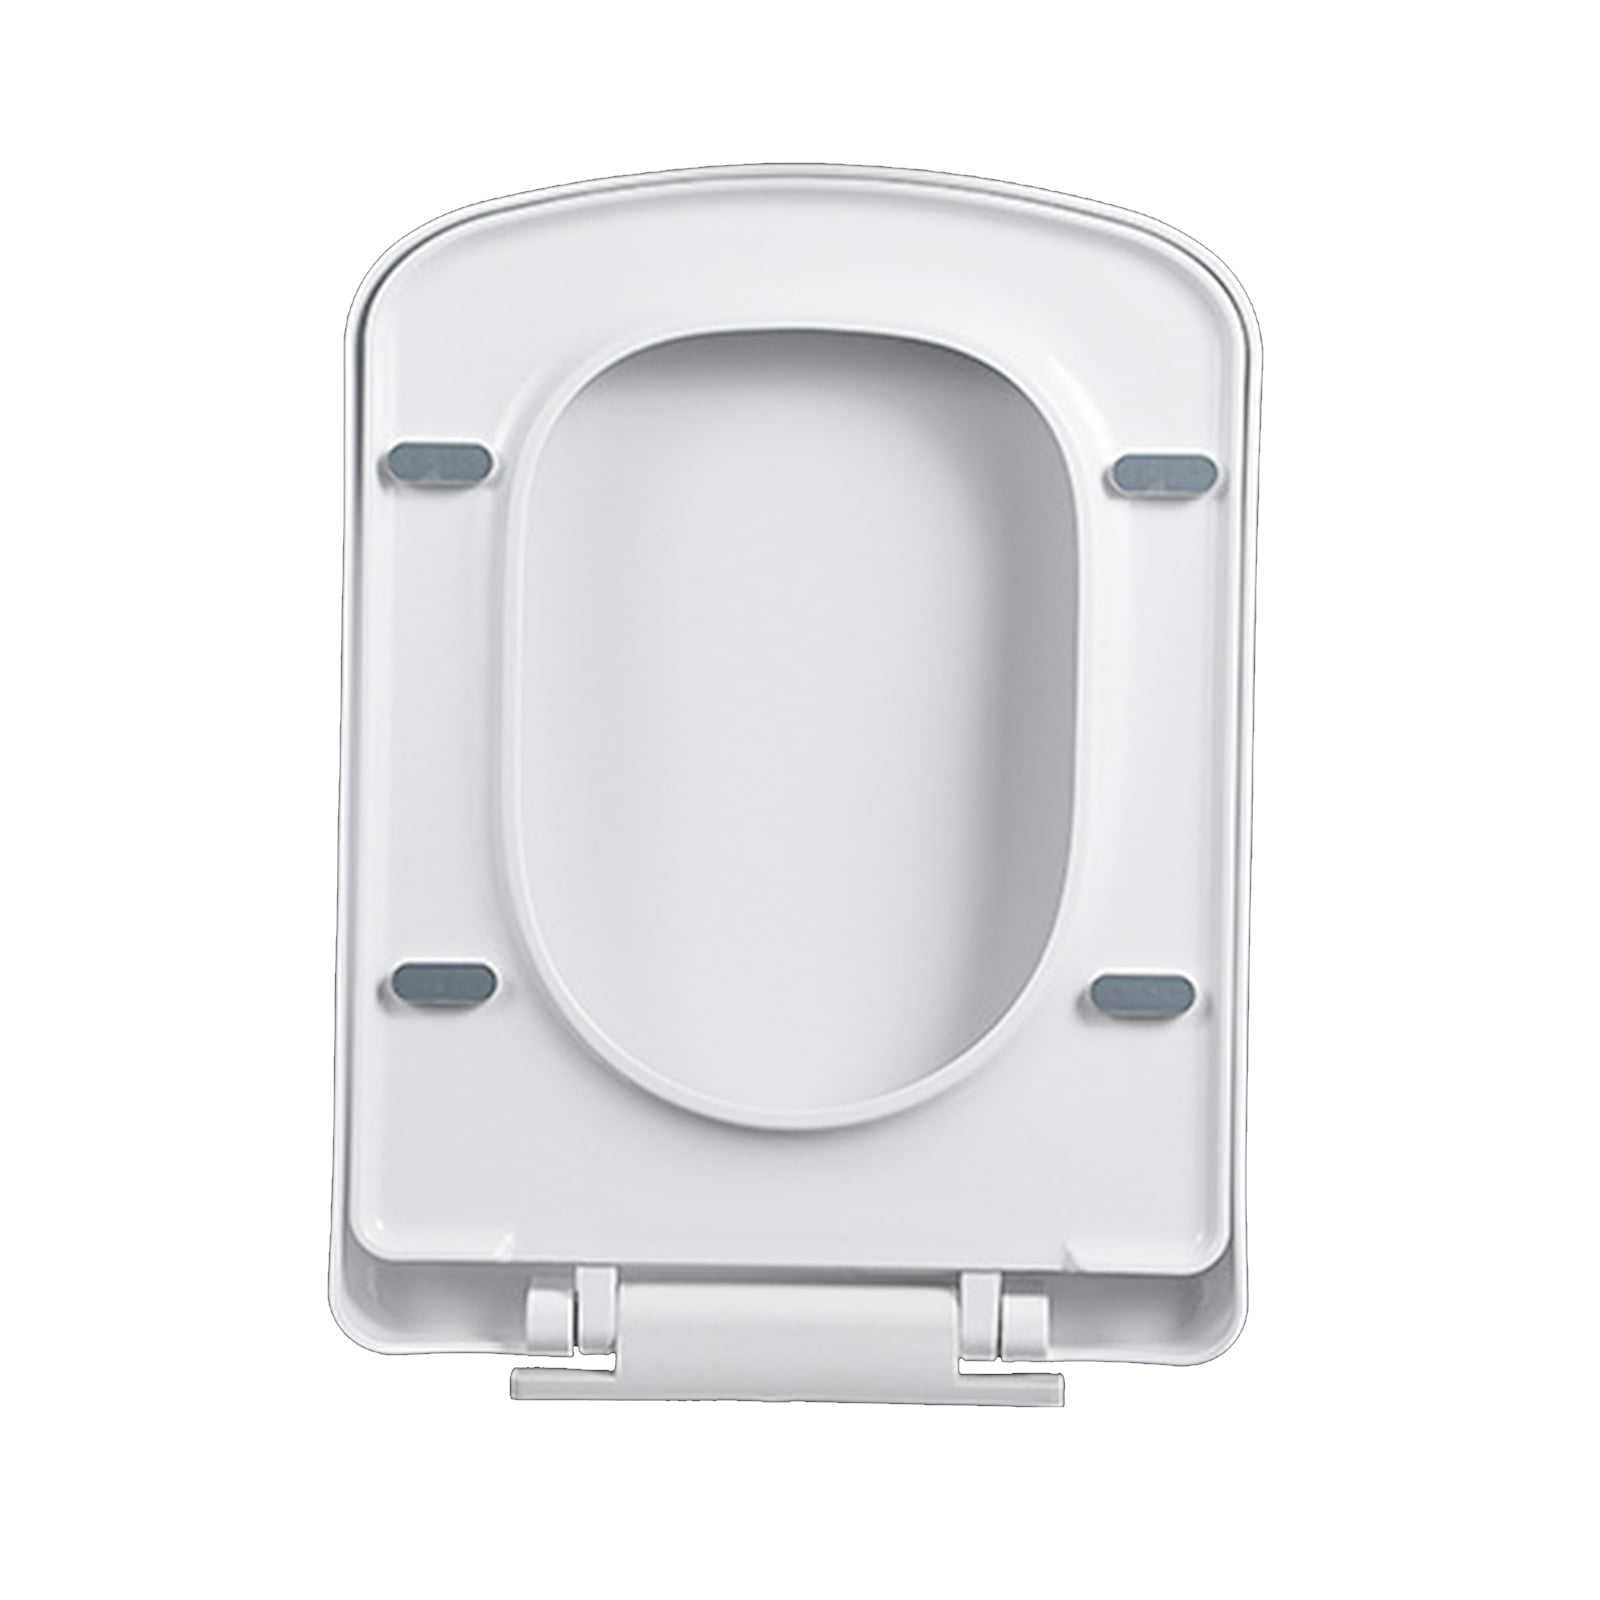 Details about   LUXURY D SHAPE Soft Close Toilet Seat White WC W/ Top Fixing Quick Release Hinge 